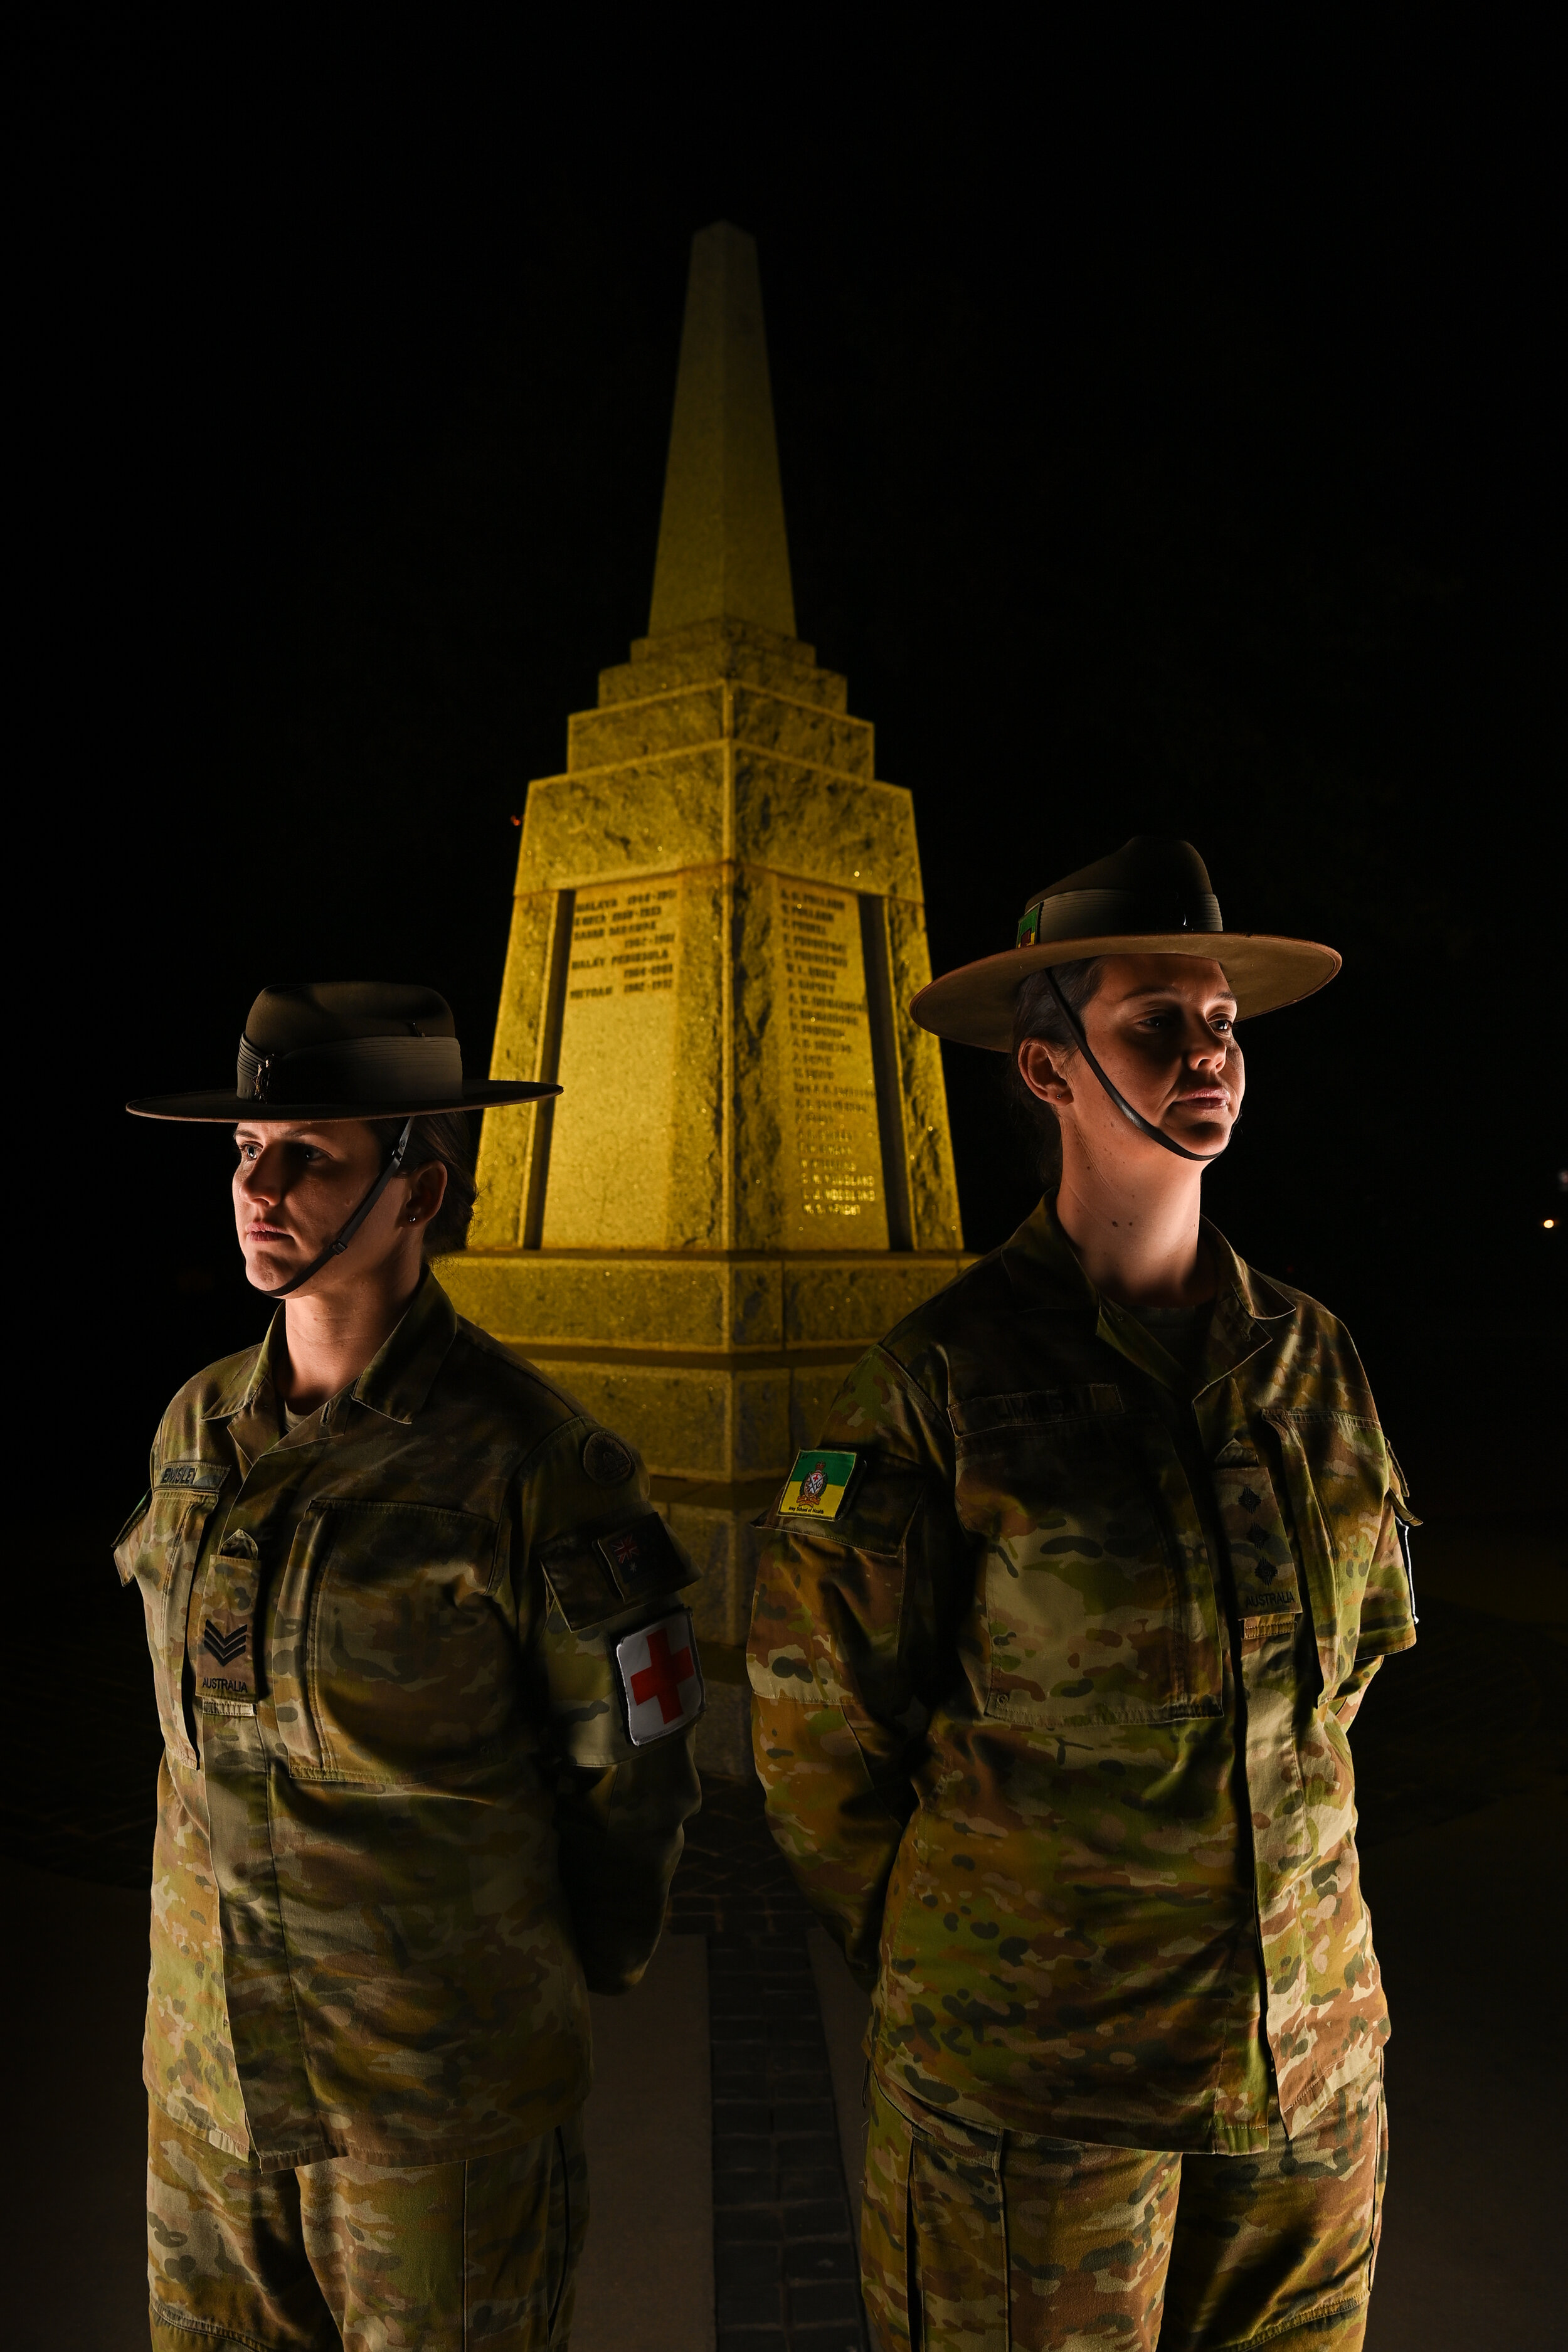  (Photo Mark Jesser) Wodonga. Annual Anzac Day image. Wodonga Cenotaph. Army personnel Sergeant (SGT) Nicola Emsley and Captain (CAPT) Jess Limmer who worked on Operation COVID-19 Assist this past year. Photographed ahead of Anzac Day. Wodonga is not